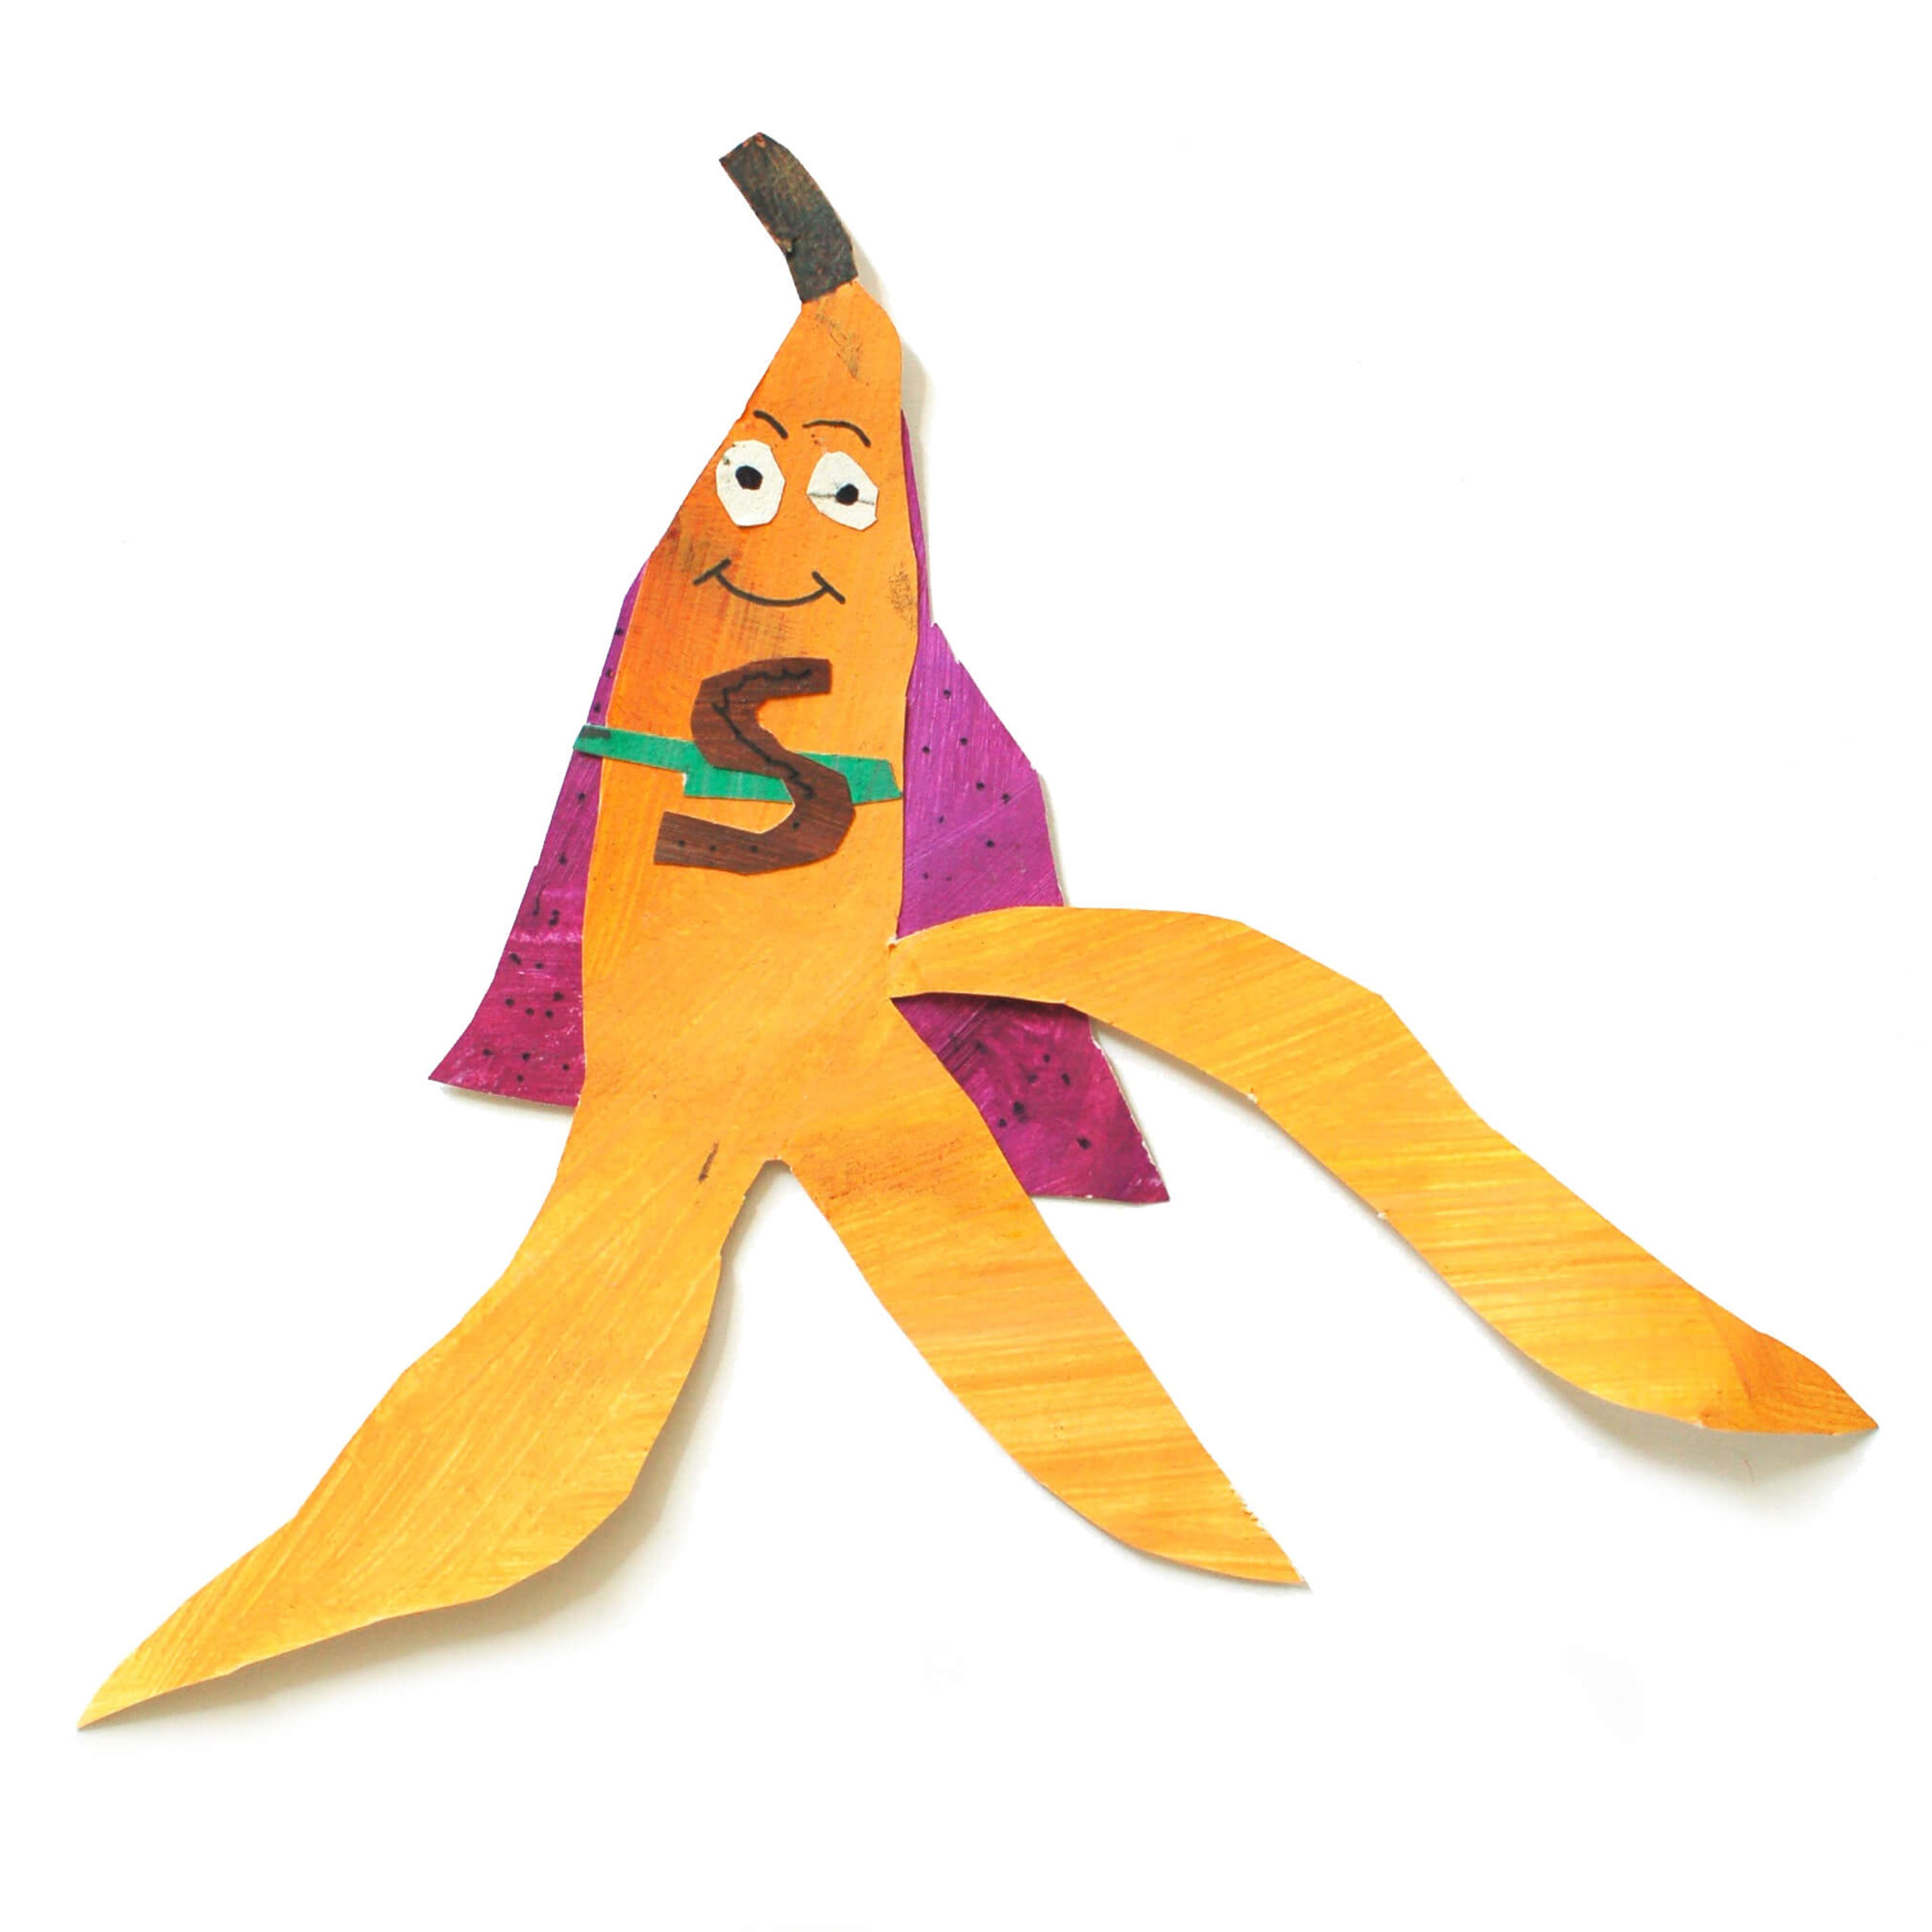 A collaged smiling banana with a cape